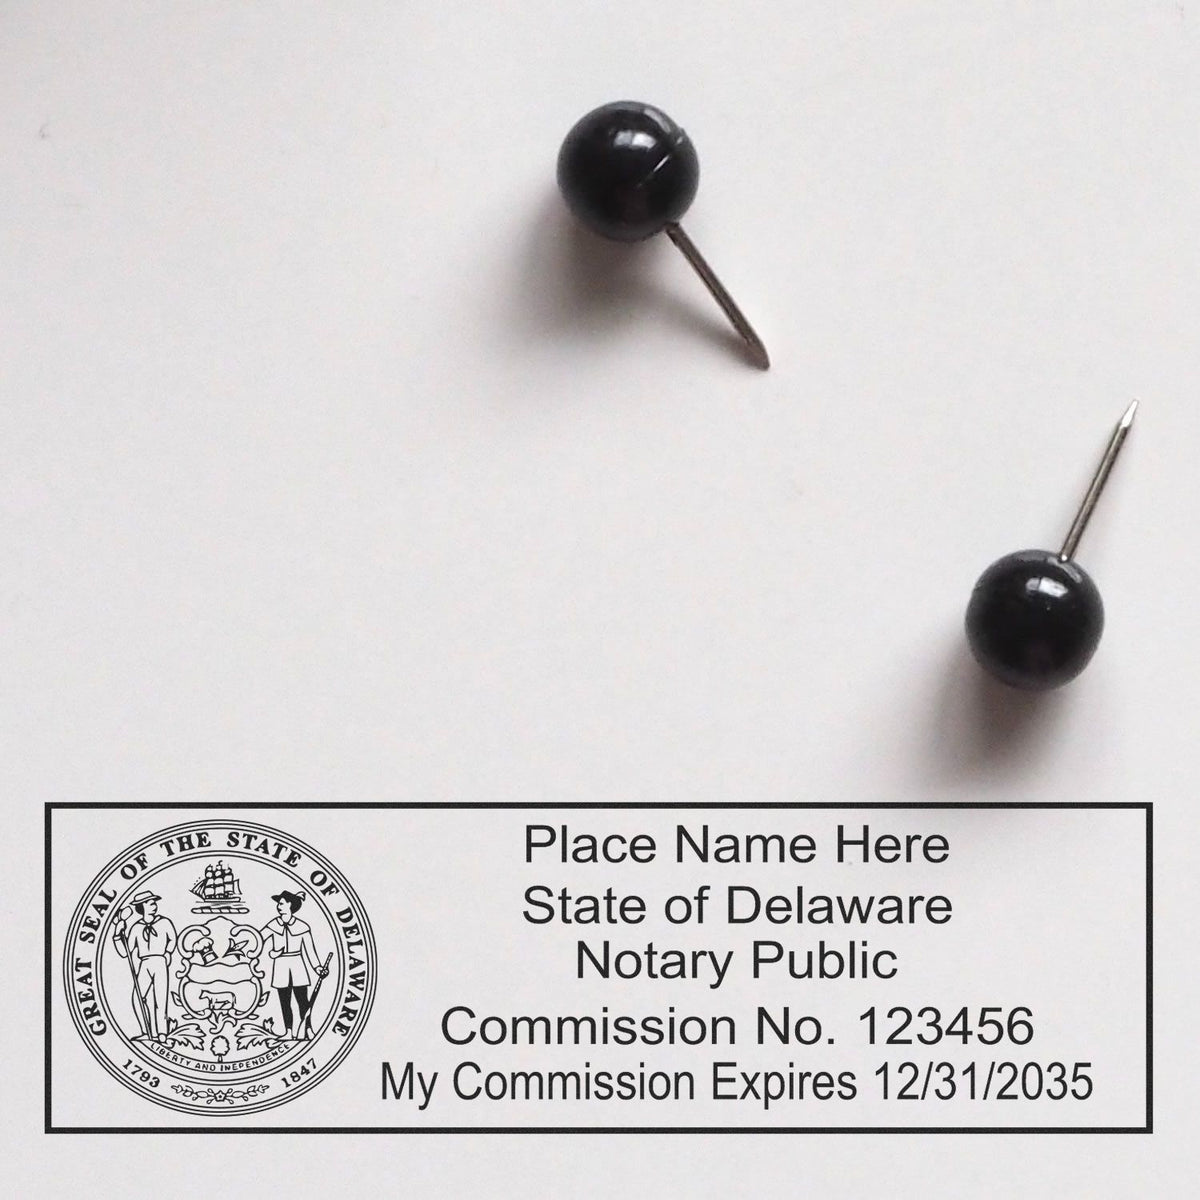 The Super Slim Delaware Notary Public Stamp stamp impression comes to life with a crisp, detailed photo on paper - showcasing true professional quality.